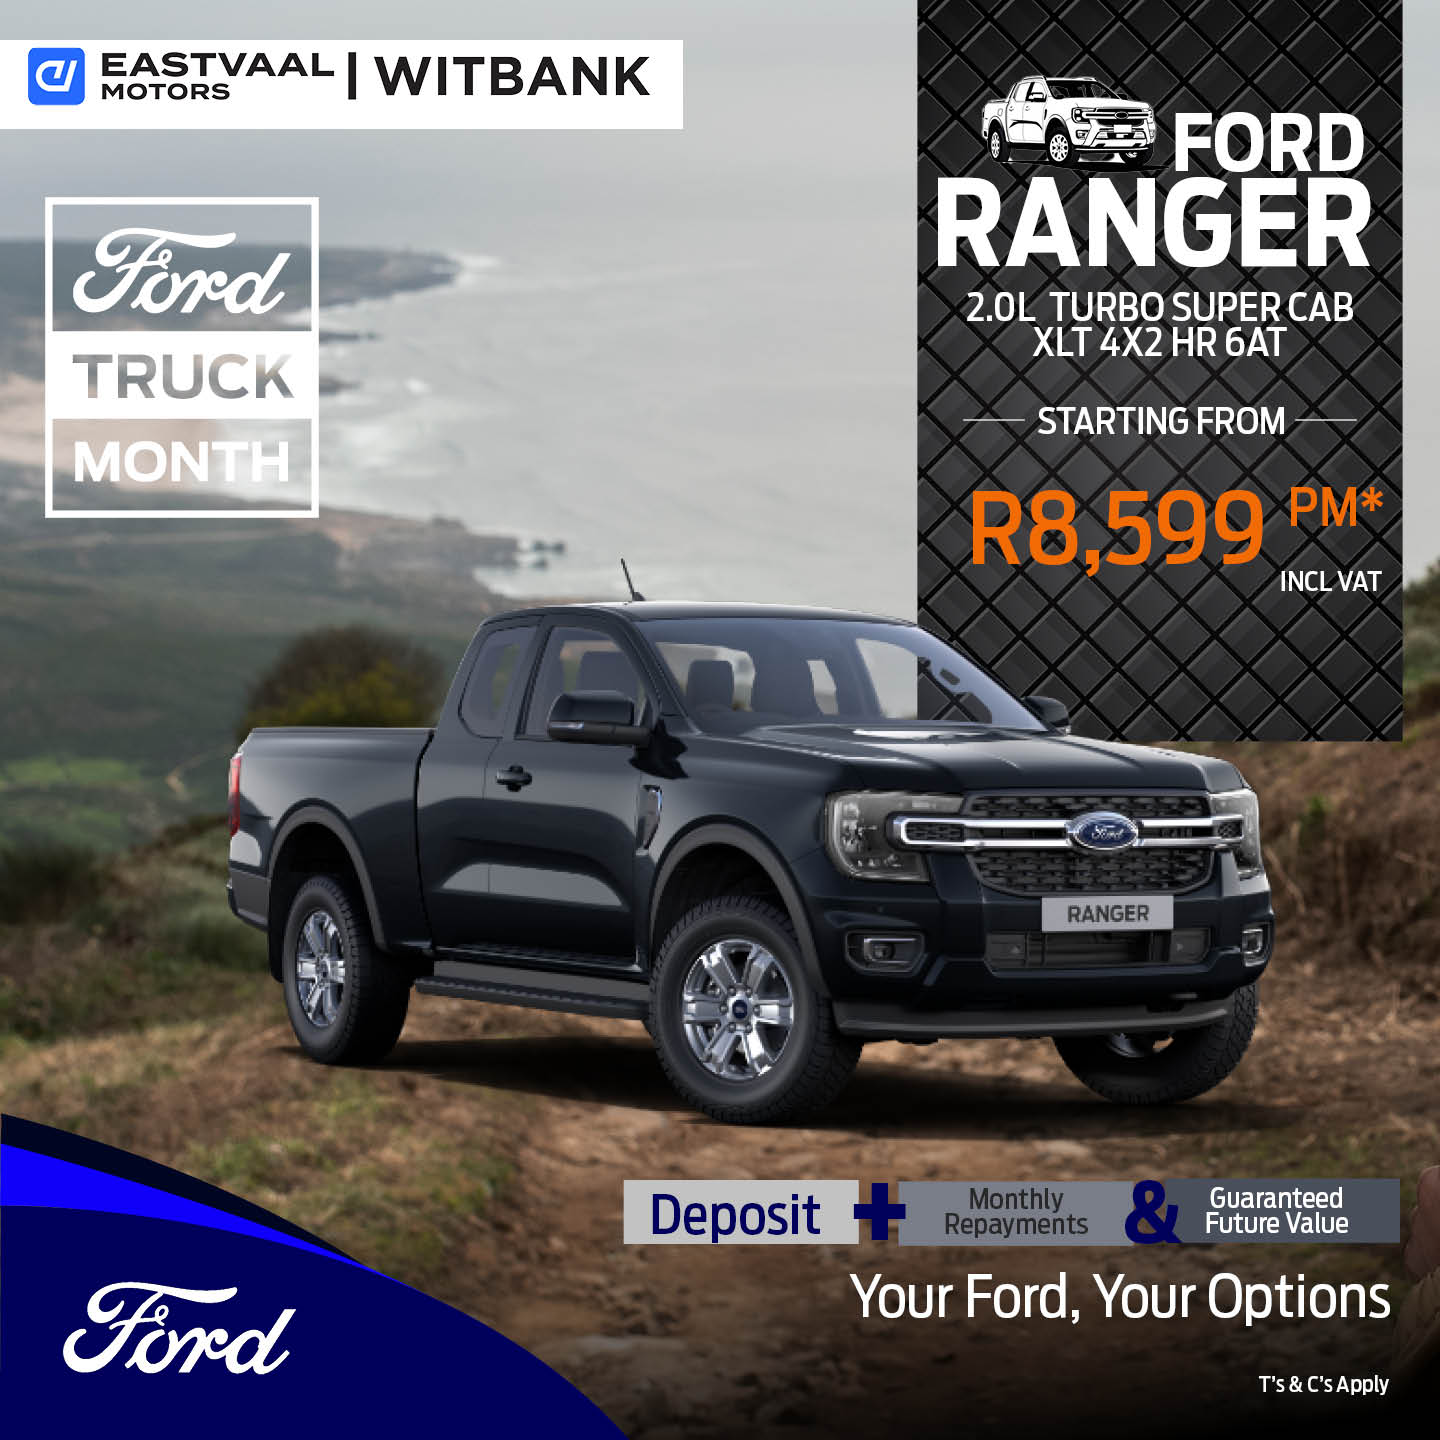 Ford Ranger 2.0L Turbo Super Cab XLT 4X2 HR 6AT image from 